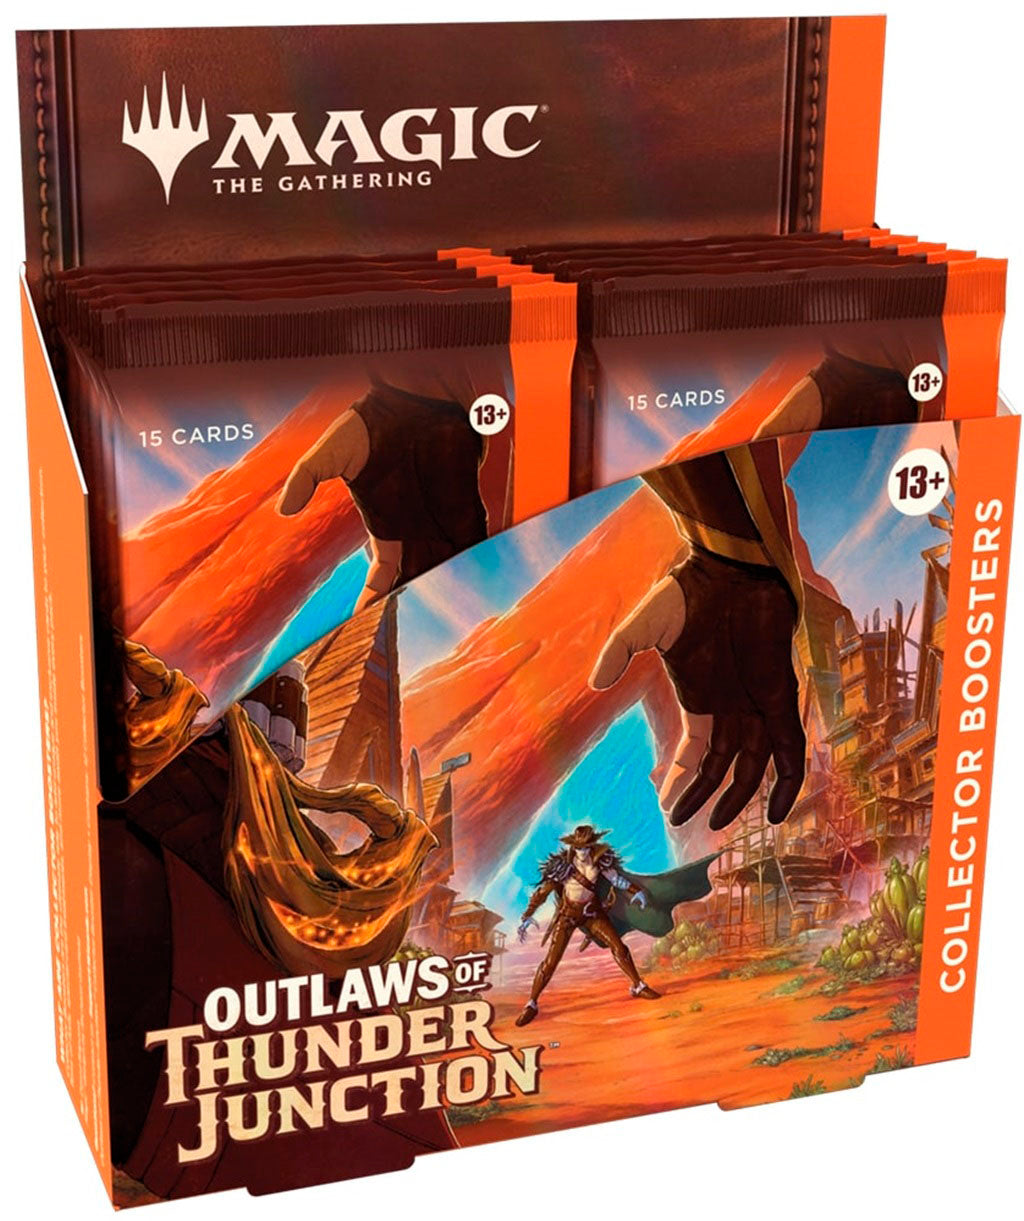 Wizards of The Coast - Magic: The Gathering Outlaws of Thunder Junction Collector Booster Box - 12 Packs (180 Magic Cards)_0